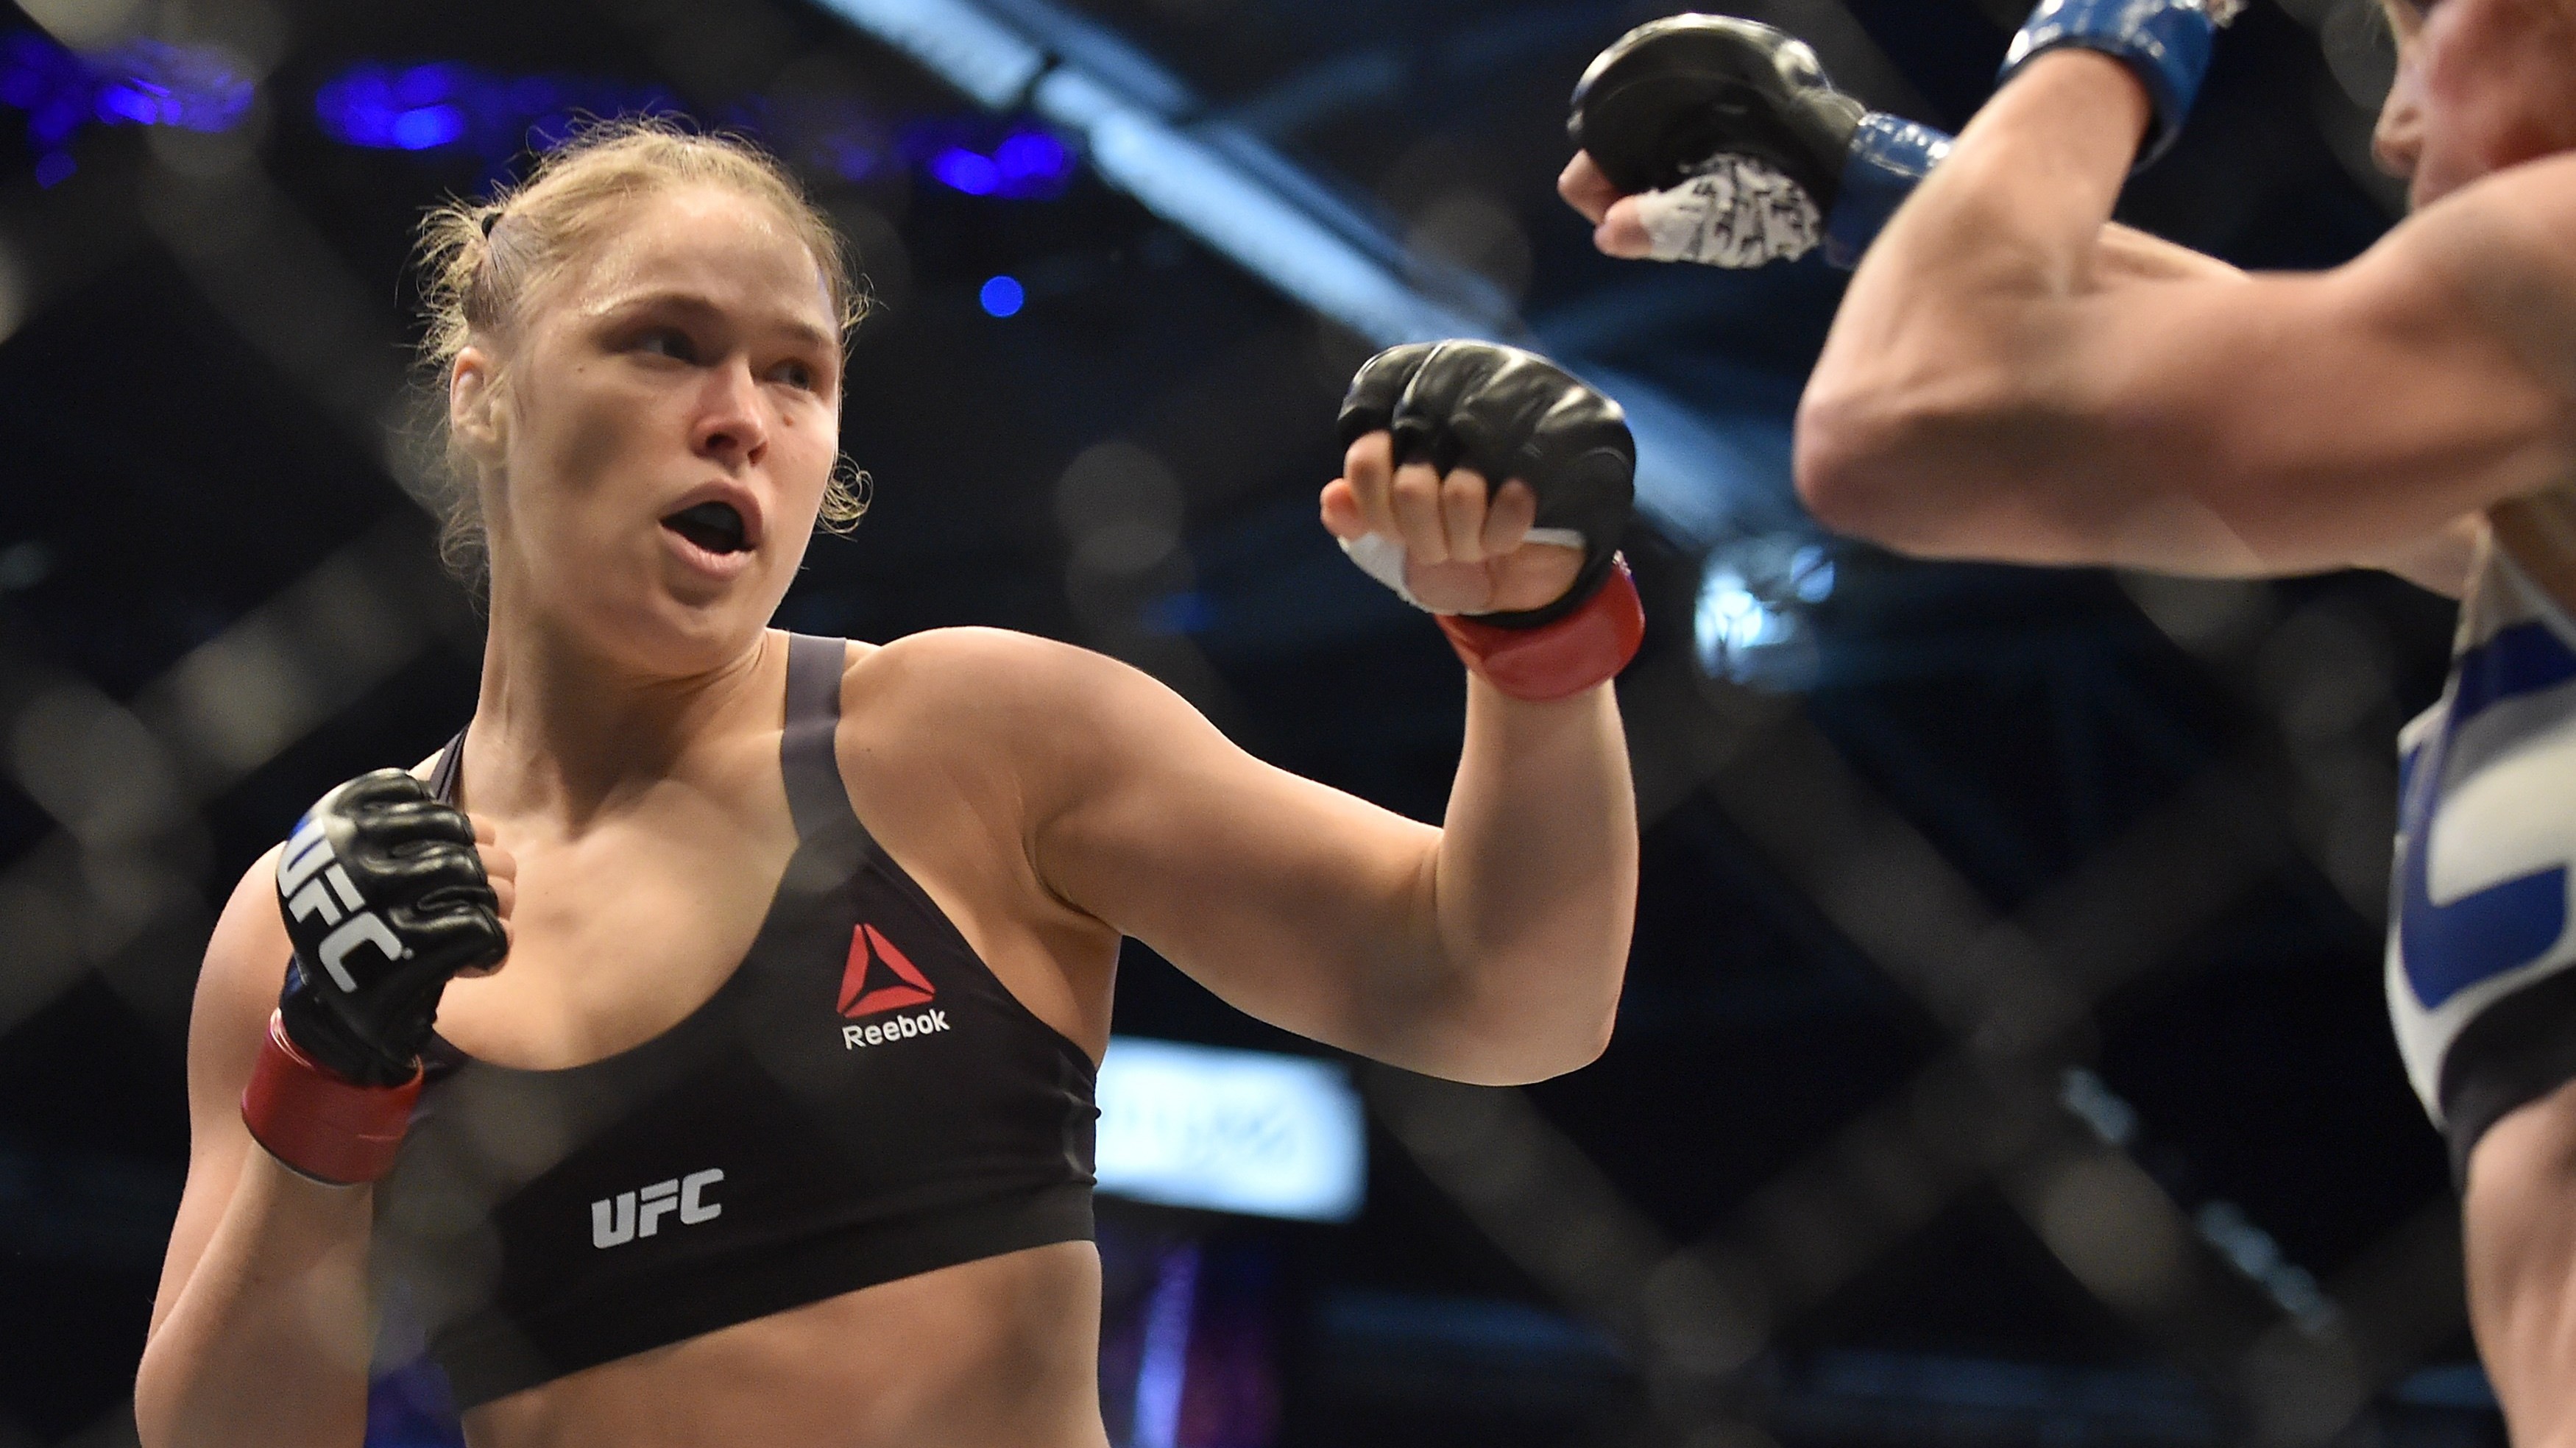 Ronda Rousey Next Fight Rumored Opponent & Date